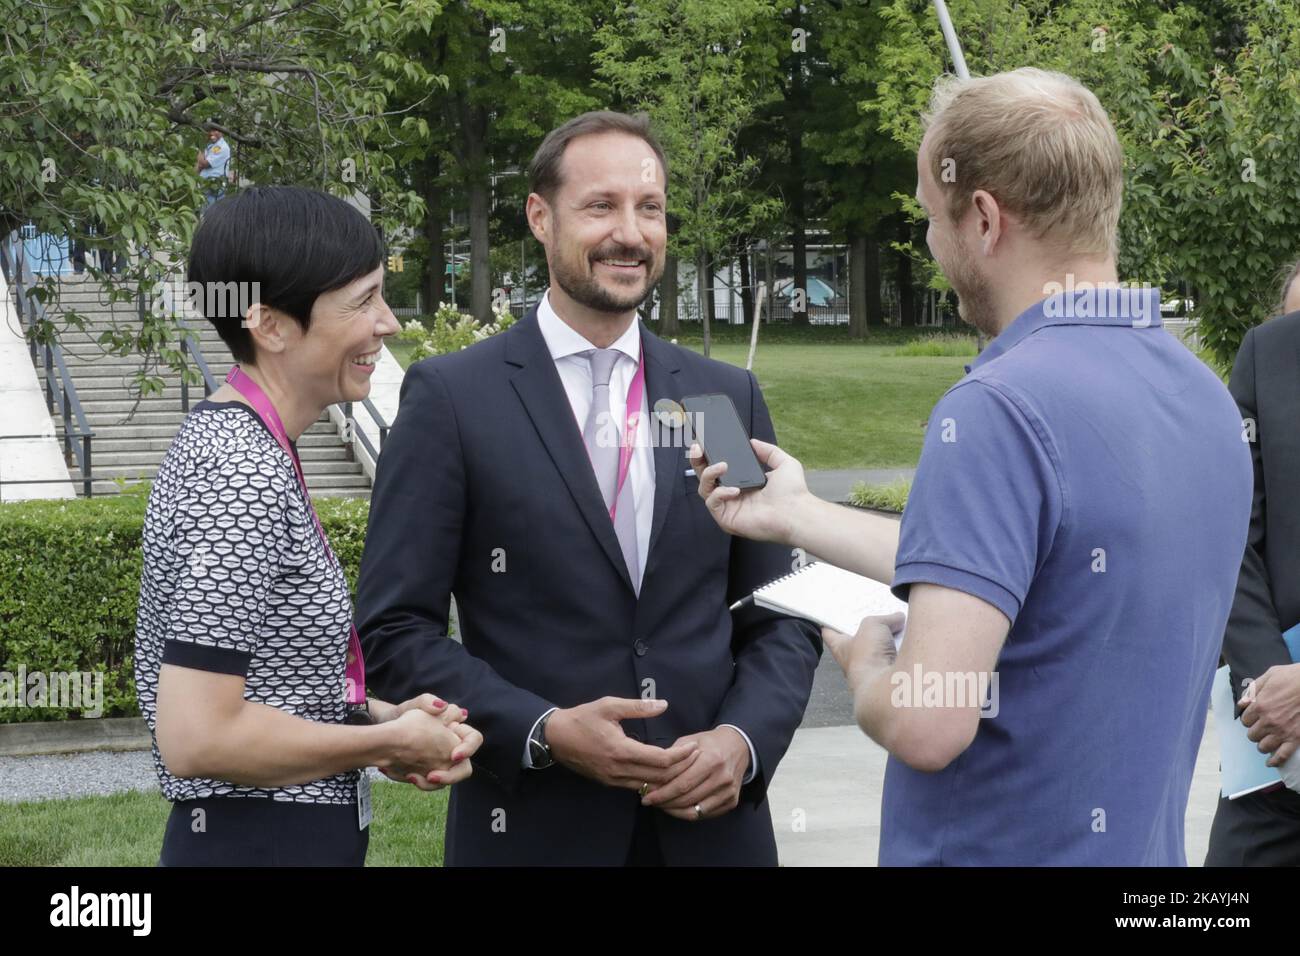 Haakon, Crown Prince of Norway and Ine Eriksen Soreide Norwegian Minister of Foreign Affairs During the launch of Norways campaign for an elected seat in the Security Council, term 2021-2022 today at the UN Headquarters Rose Garden in New York, NY on June 22, 2018. (Photo by Luiz Rampelotto/NurPhoto) Stock Photo